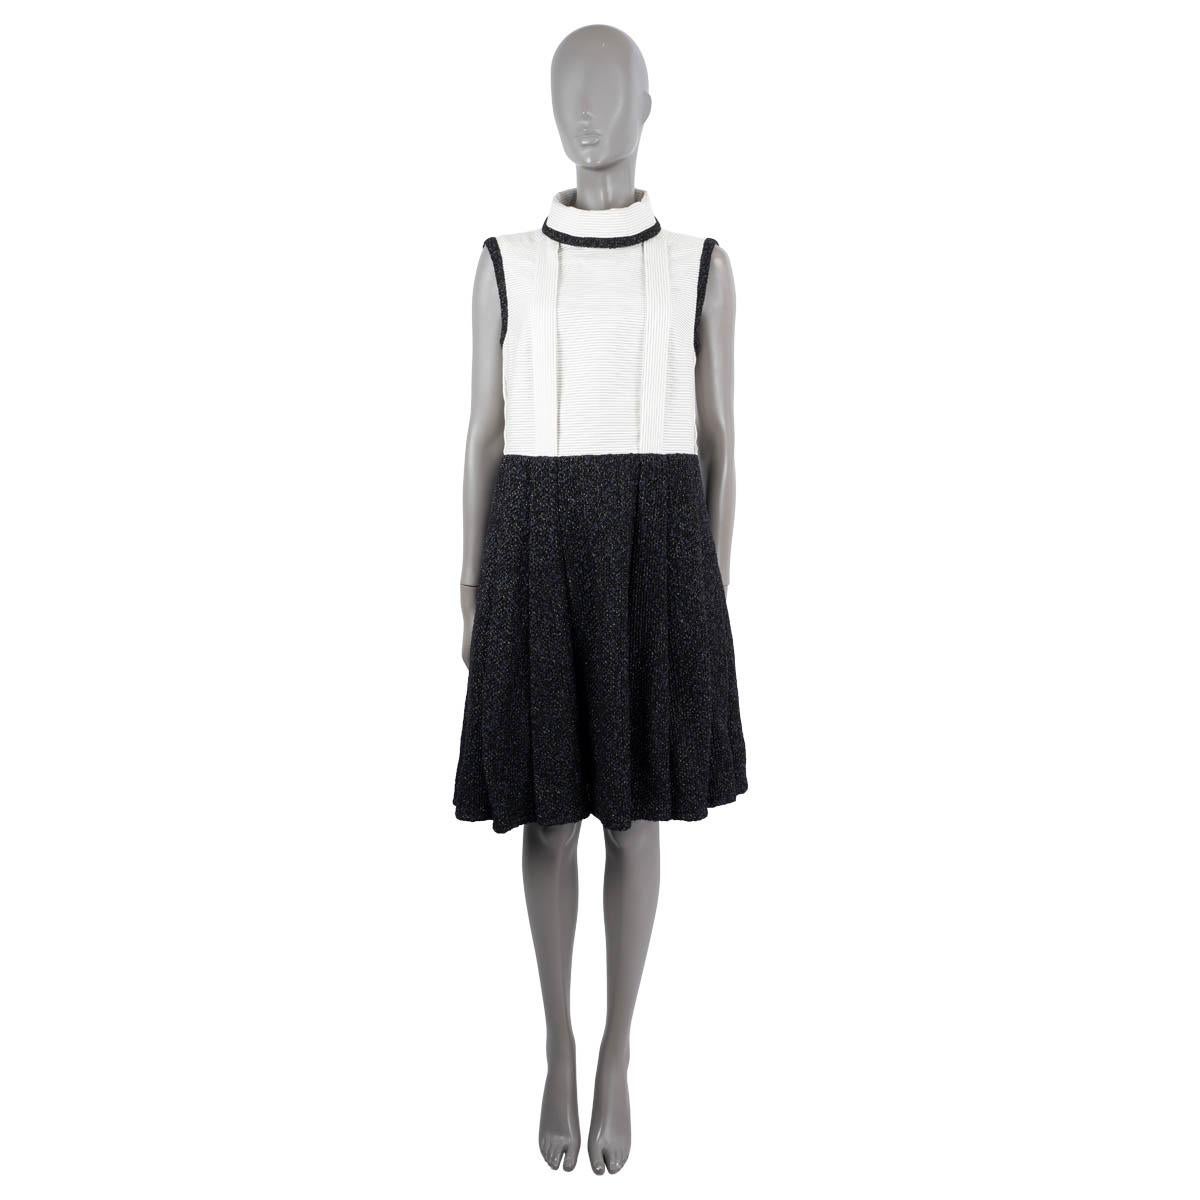 100% authentic Chanel sleeveless dress made of an ivory striped top part in cotton (95%) and polyamide (5%) with a rolled collar neckline, a Camellia embellished buttoned back, pleated deatils and tweed trim. The knee-leght skirt part is made of